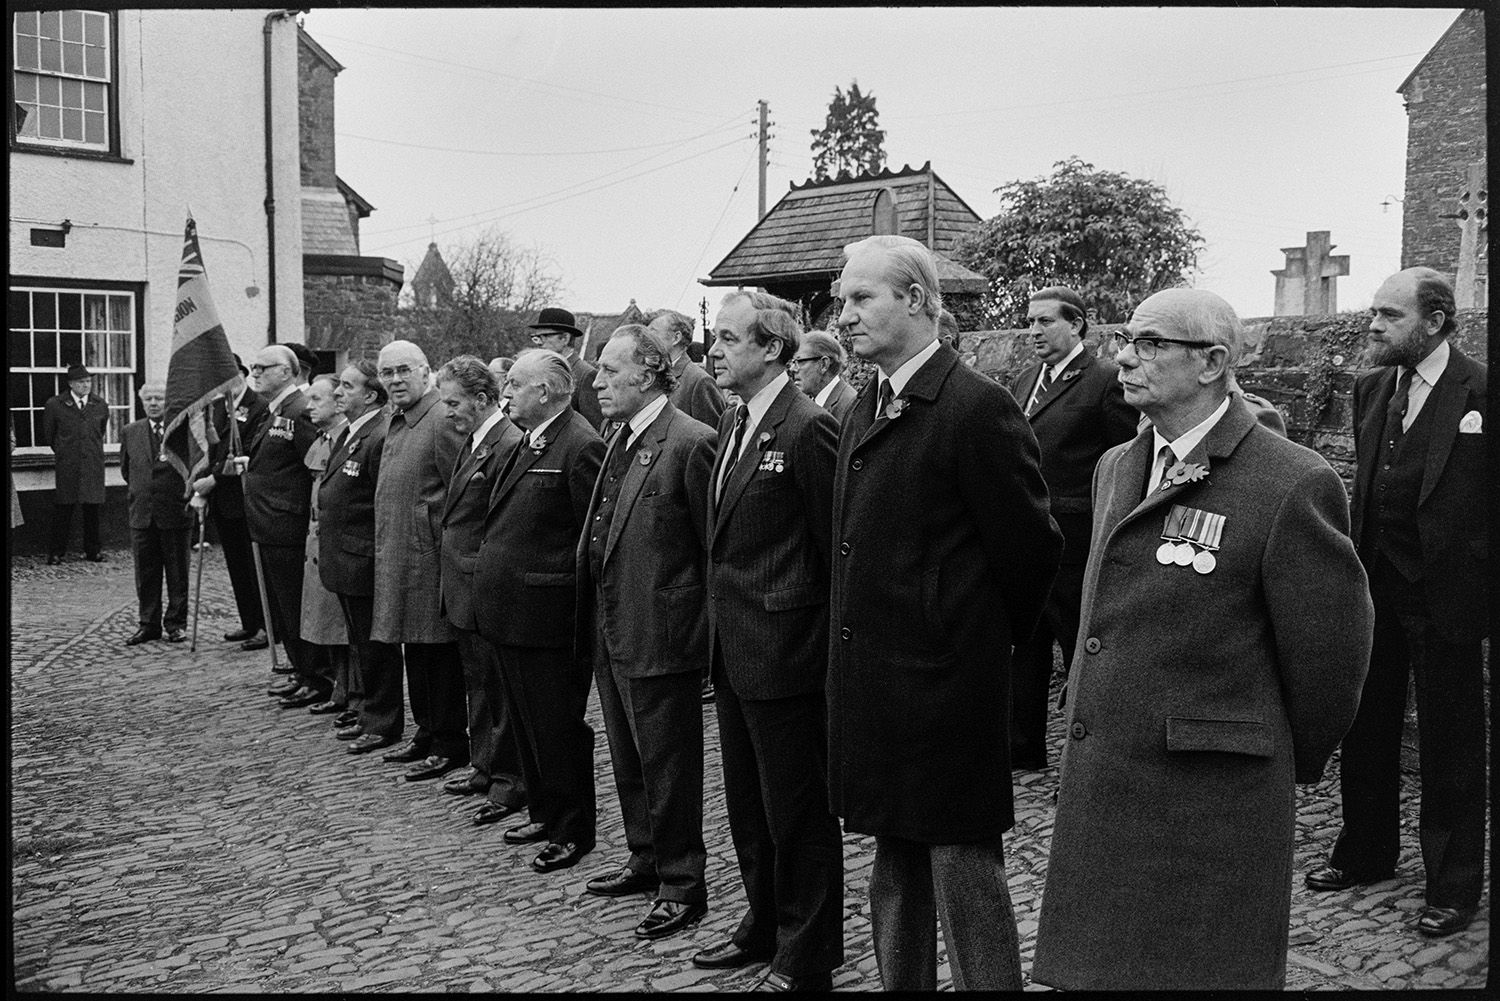 Armistice Day, inspection and parade to church, both women and men. Scouts and brownies. 
[Men, possibly ex-servicemen, lined up on a cobbled street by the Chulmleigh war memorial for Remembrance Day. Some of them are wearing medals.]